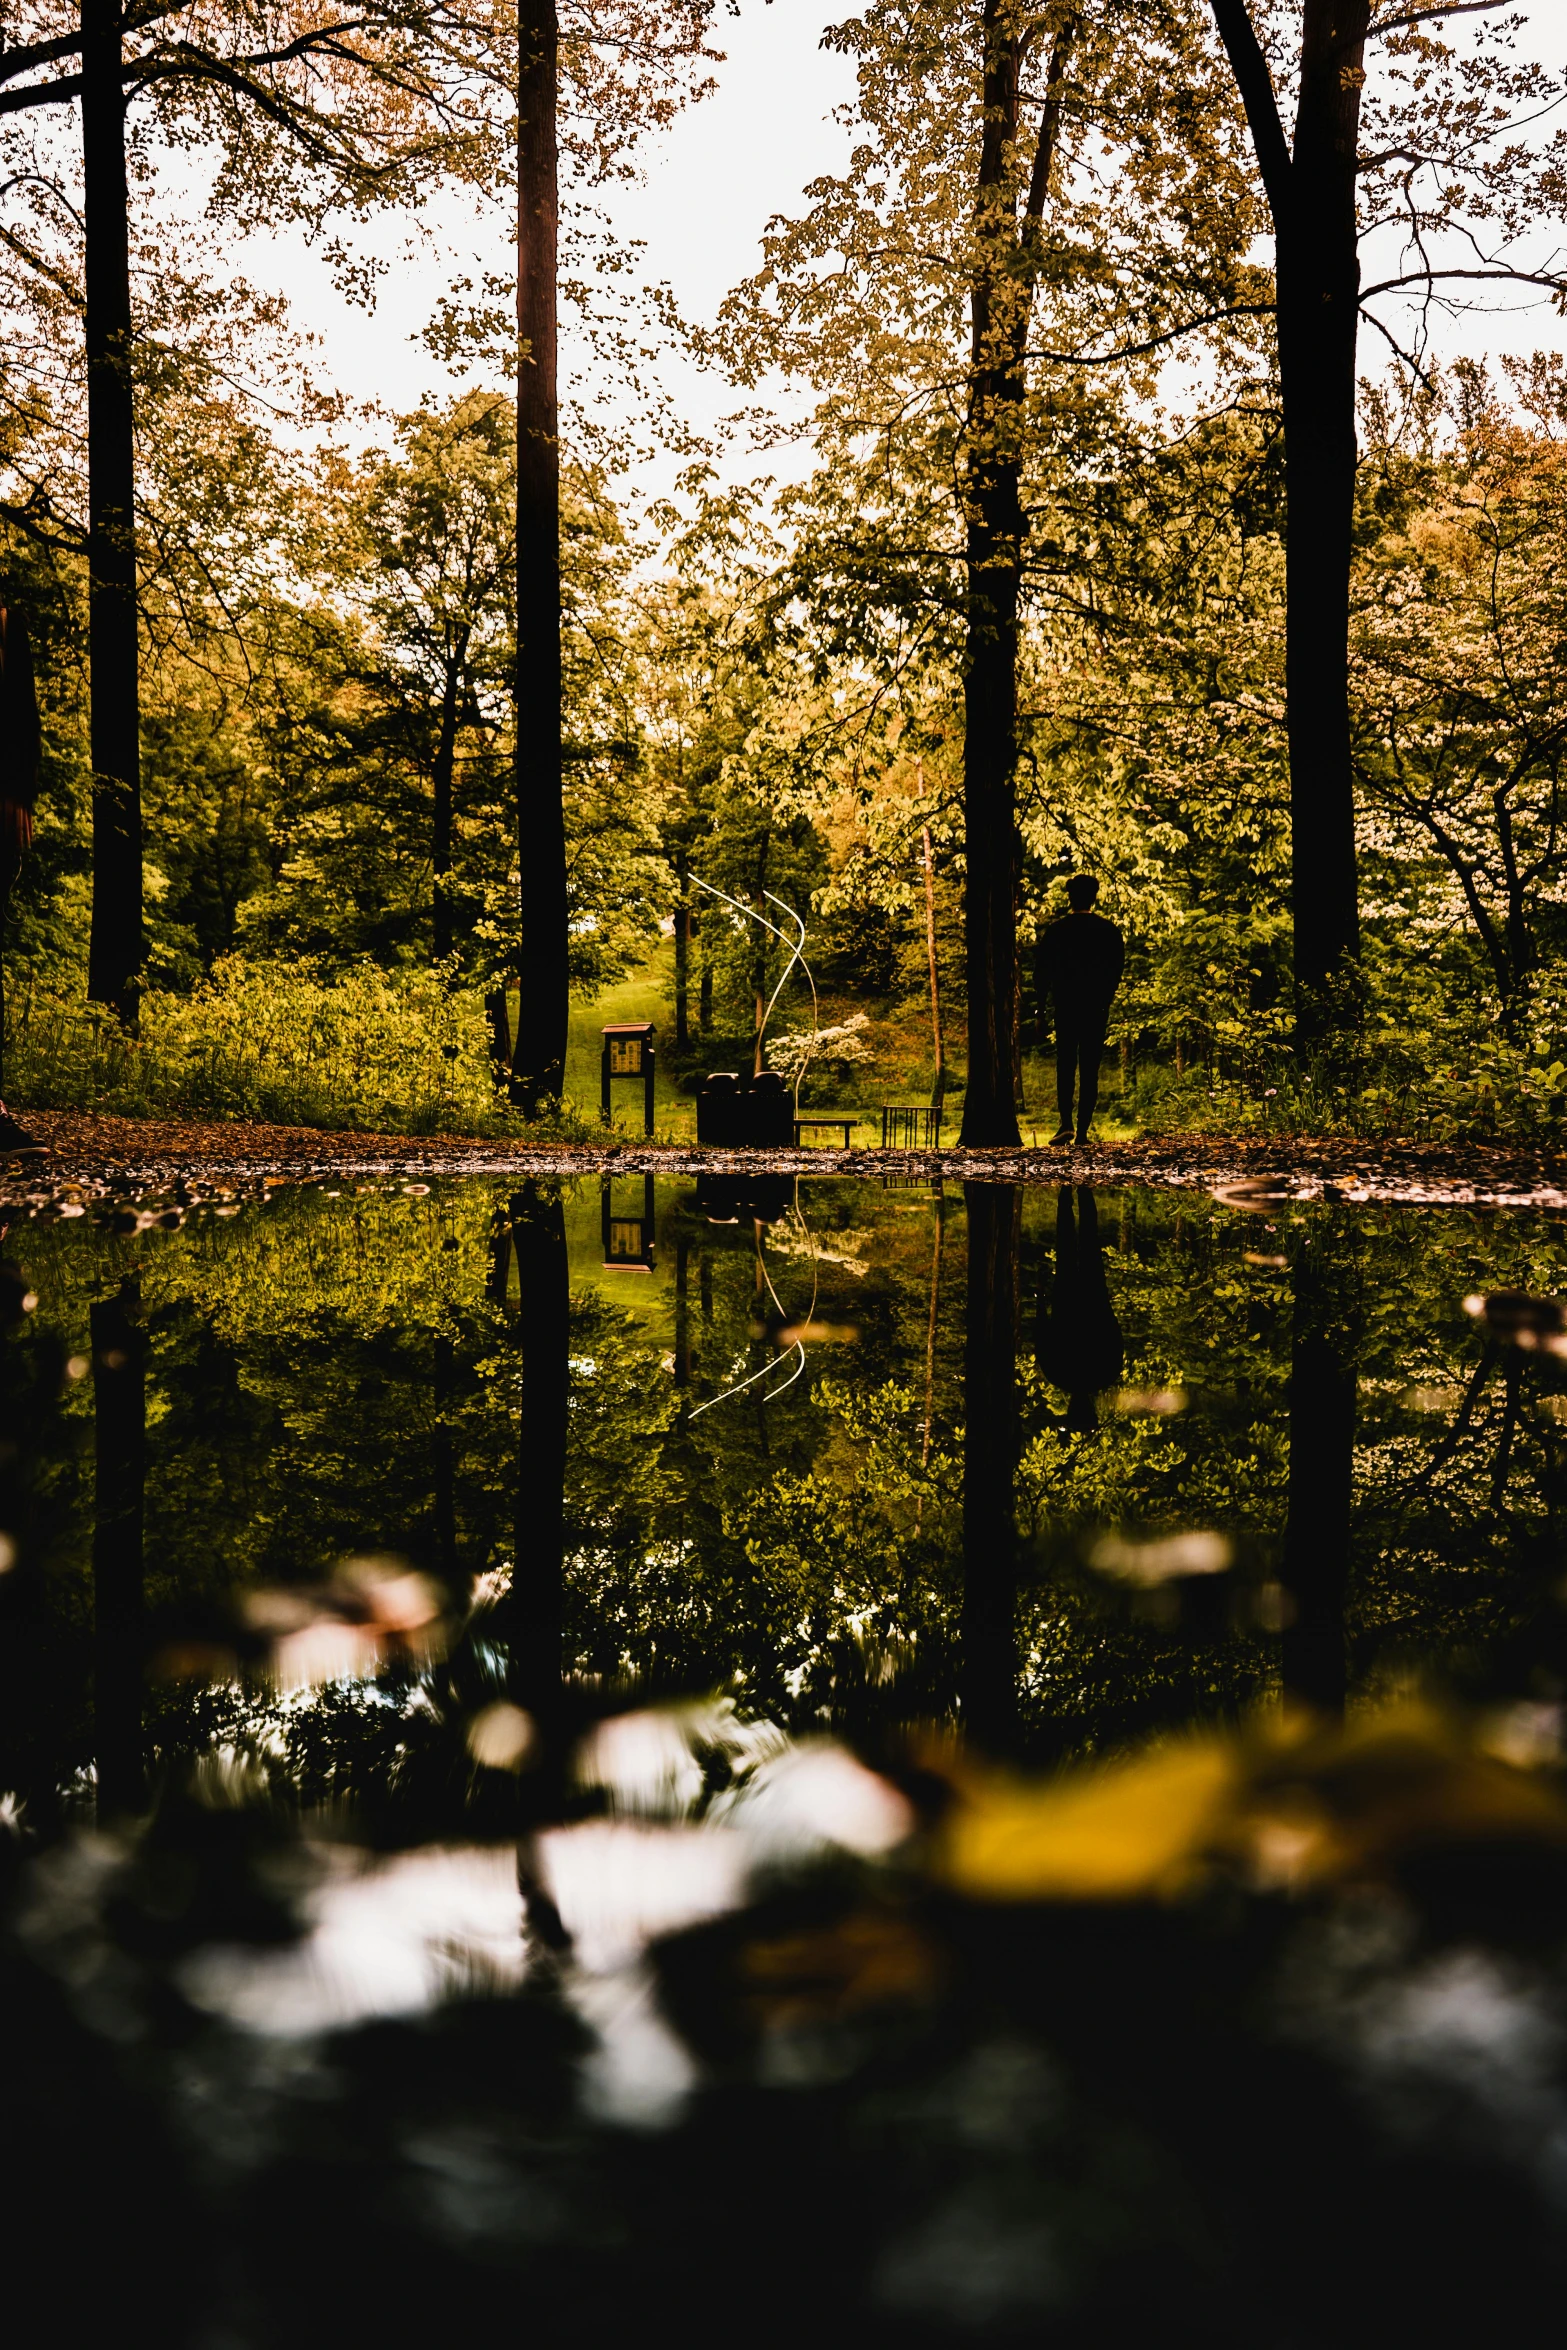 a forest filled with lots of trees next to a body of water, a picture, by Jacob Toorenvliet, pexels contest winner, visual art, wet reflections in square eyes, autum garden, private moment, a wooden